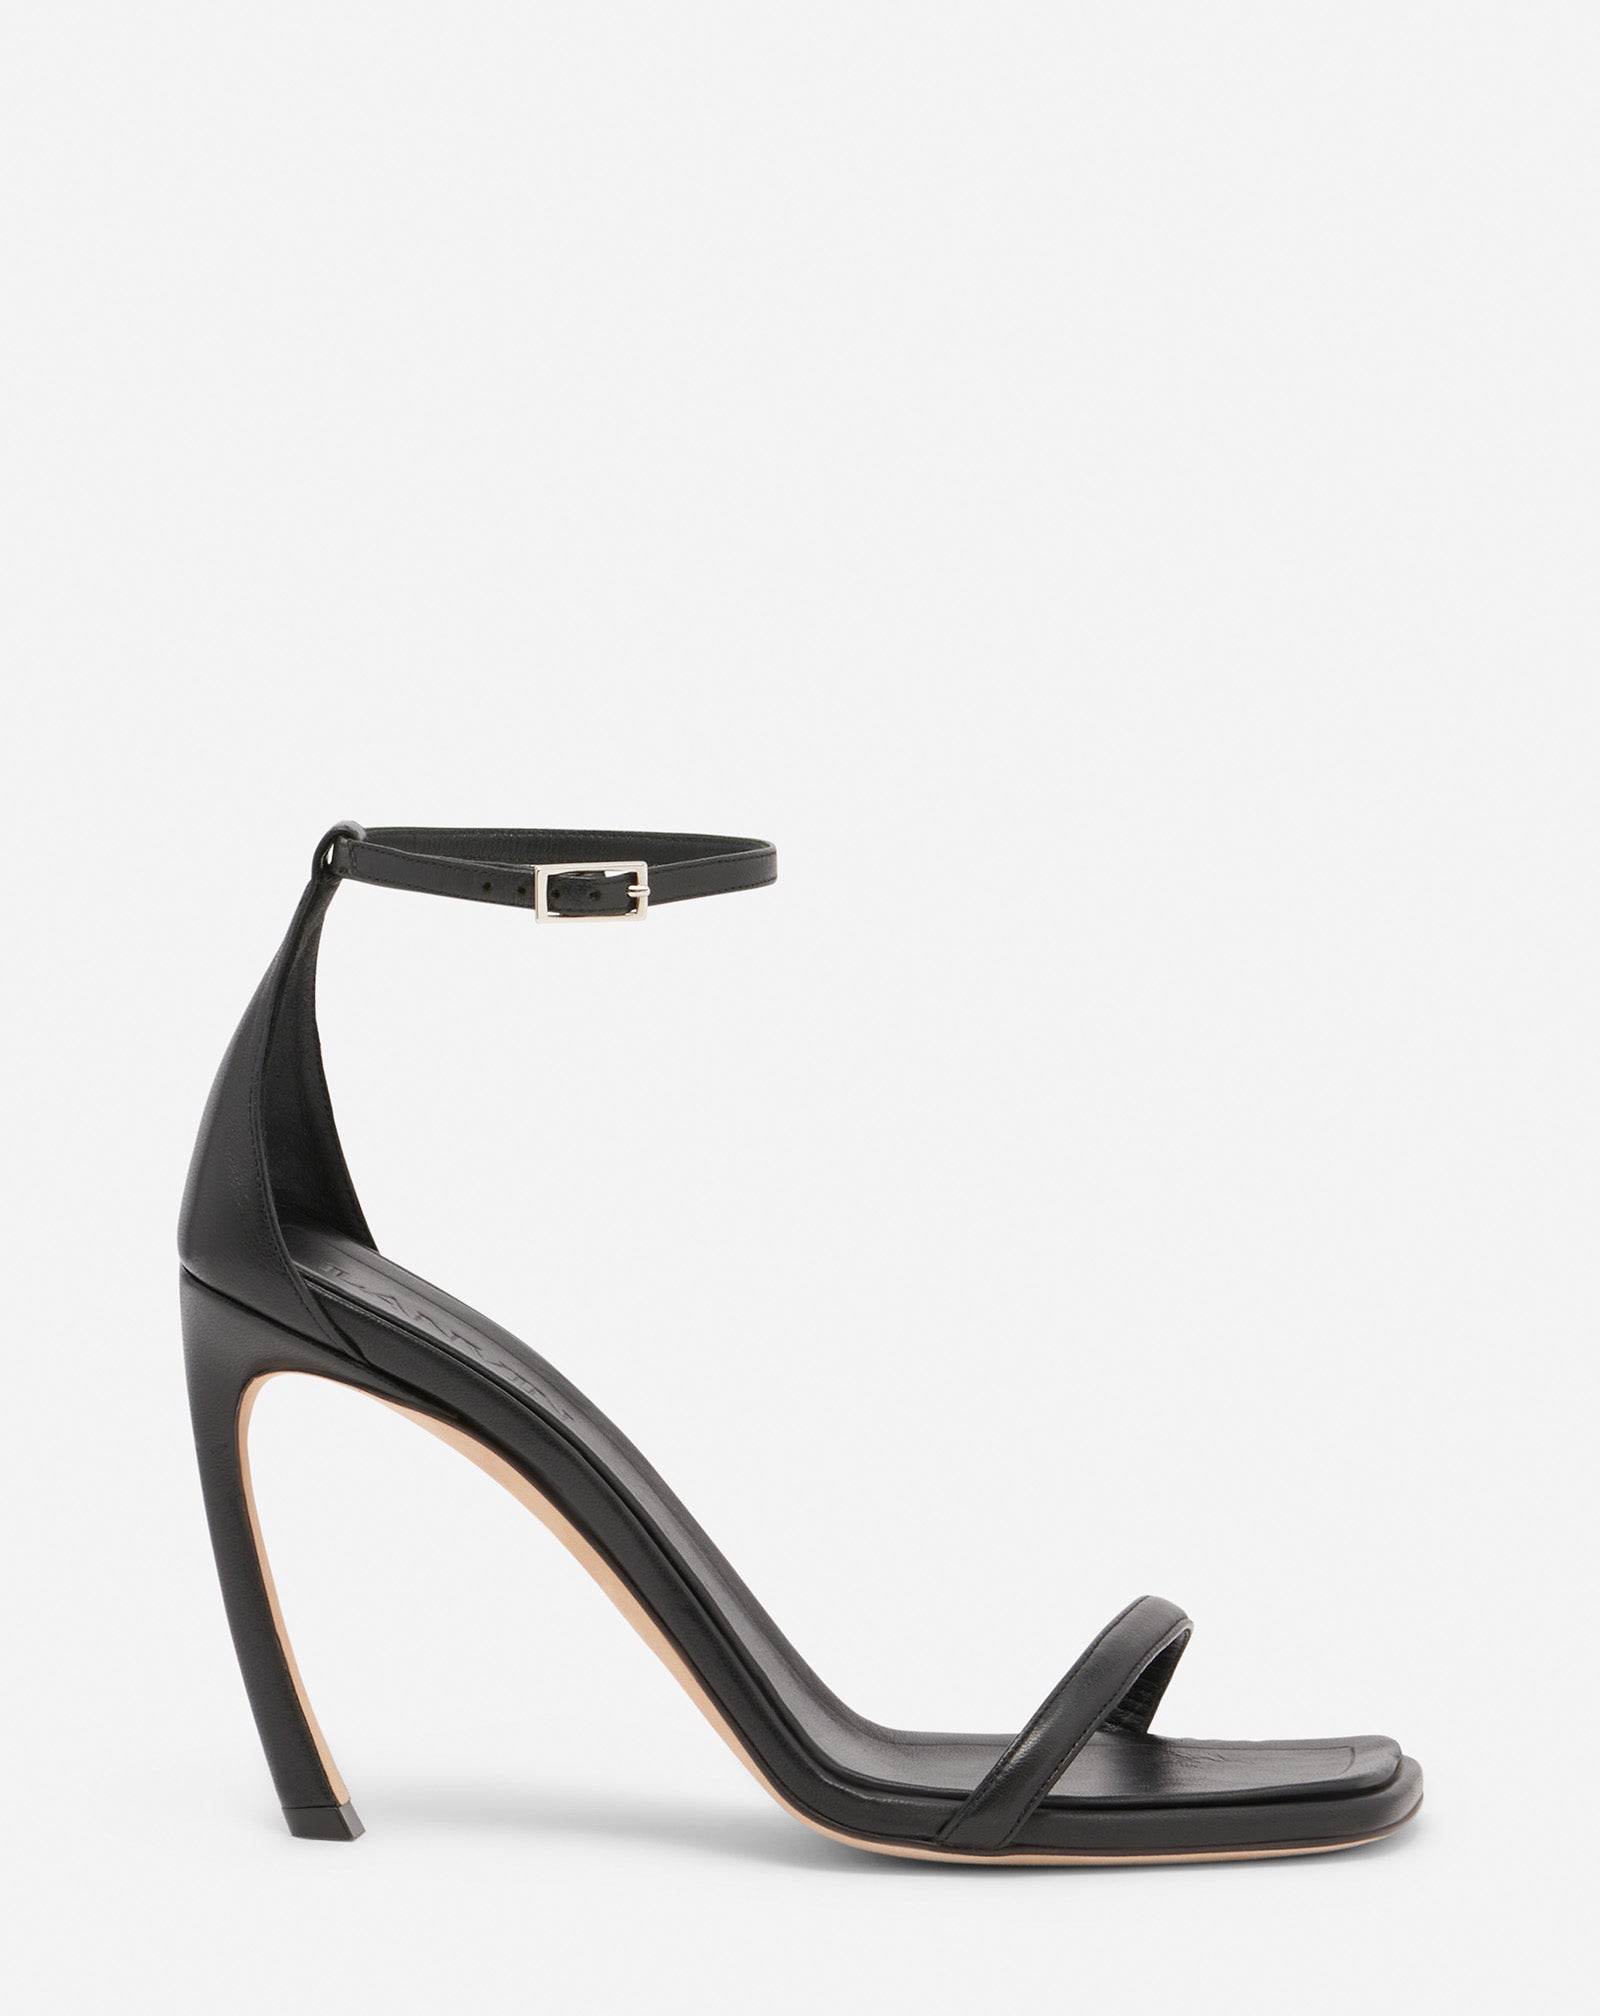 LEATHER SWING SANDALS, BLACK